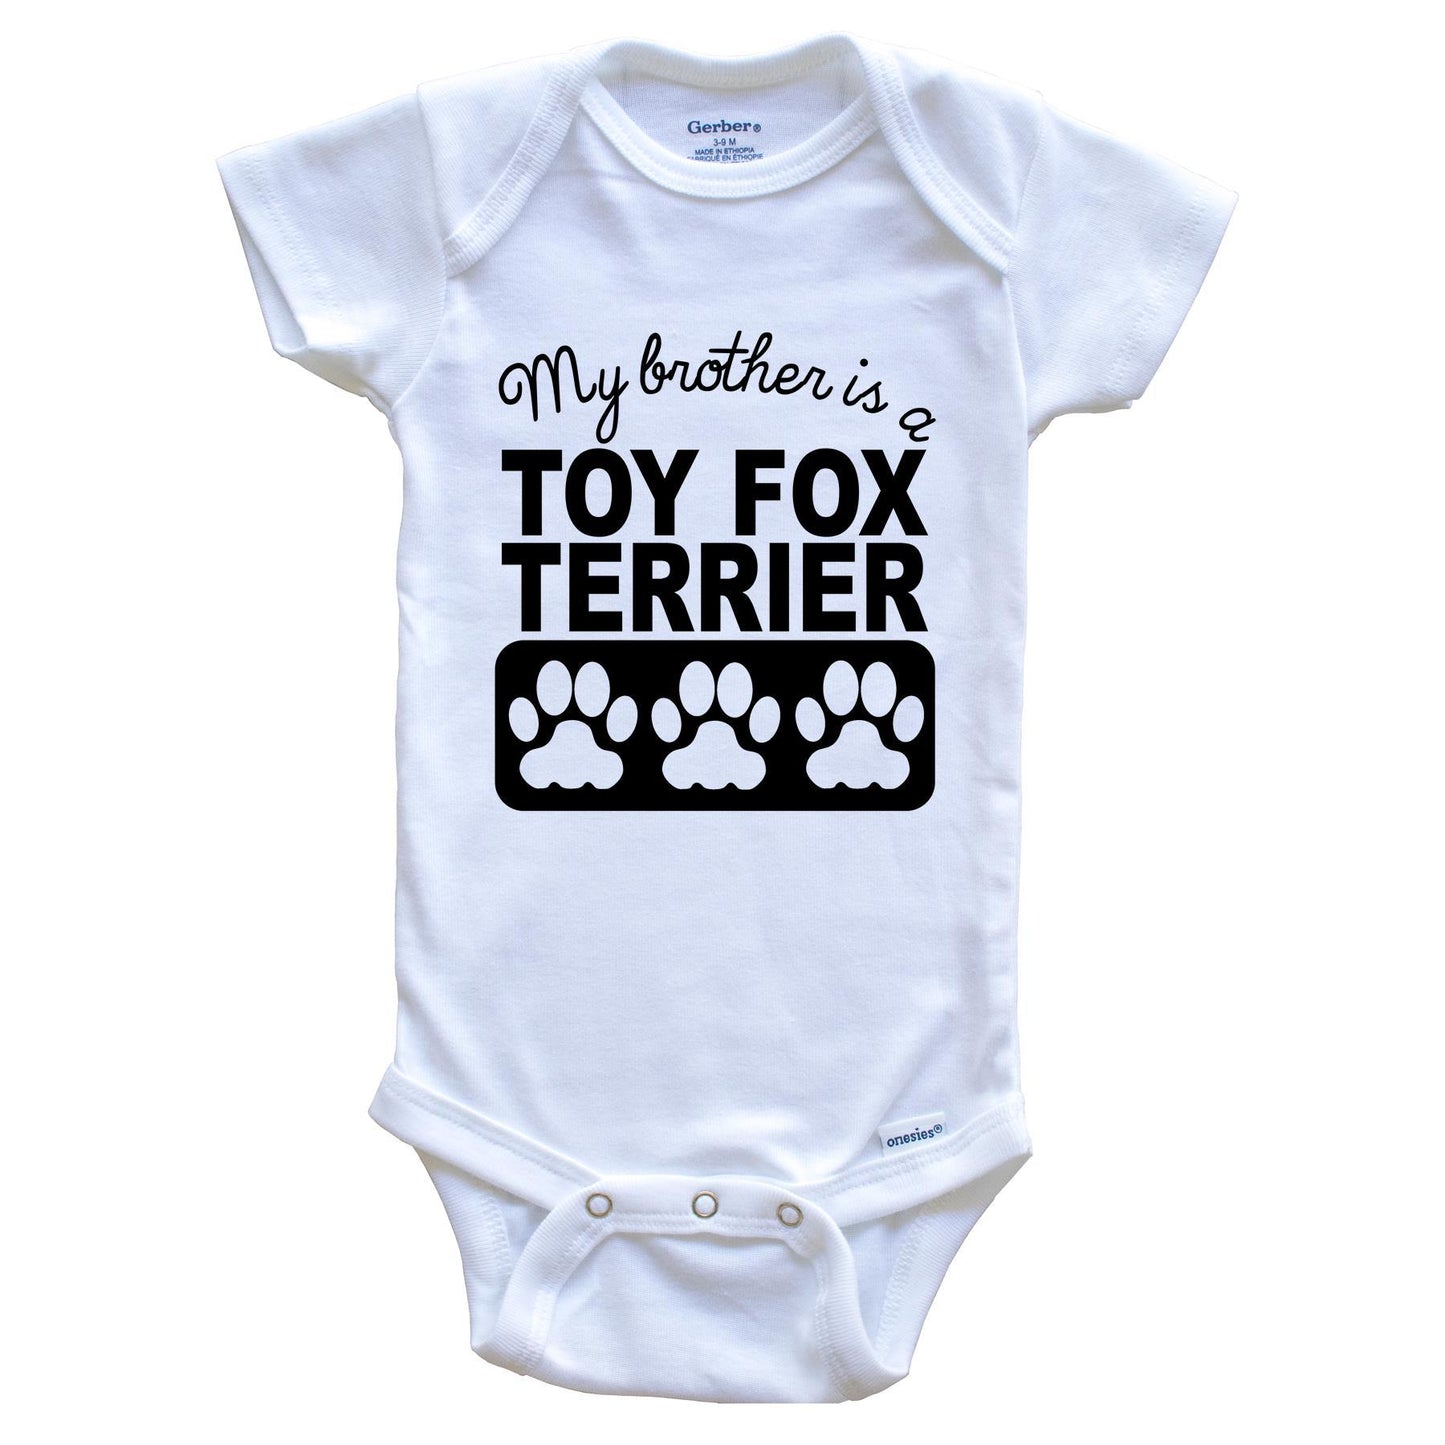 My Brother Is A Toy Fox Terrier Baby Onesie